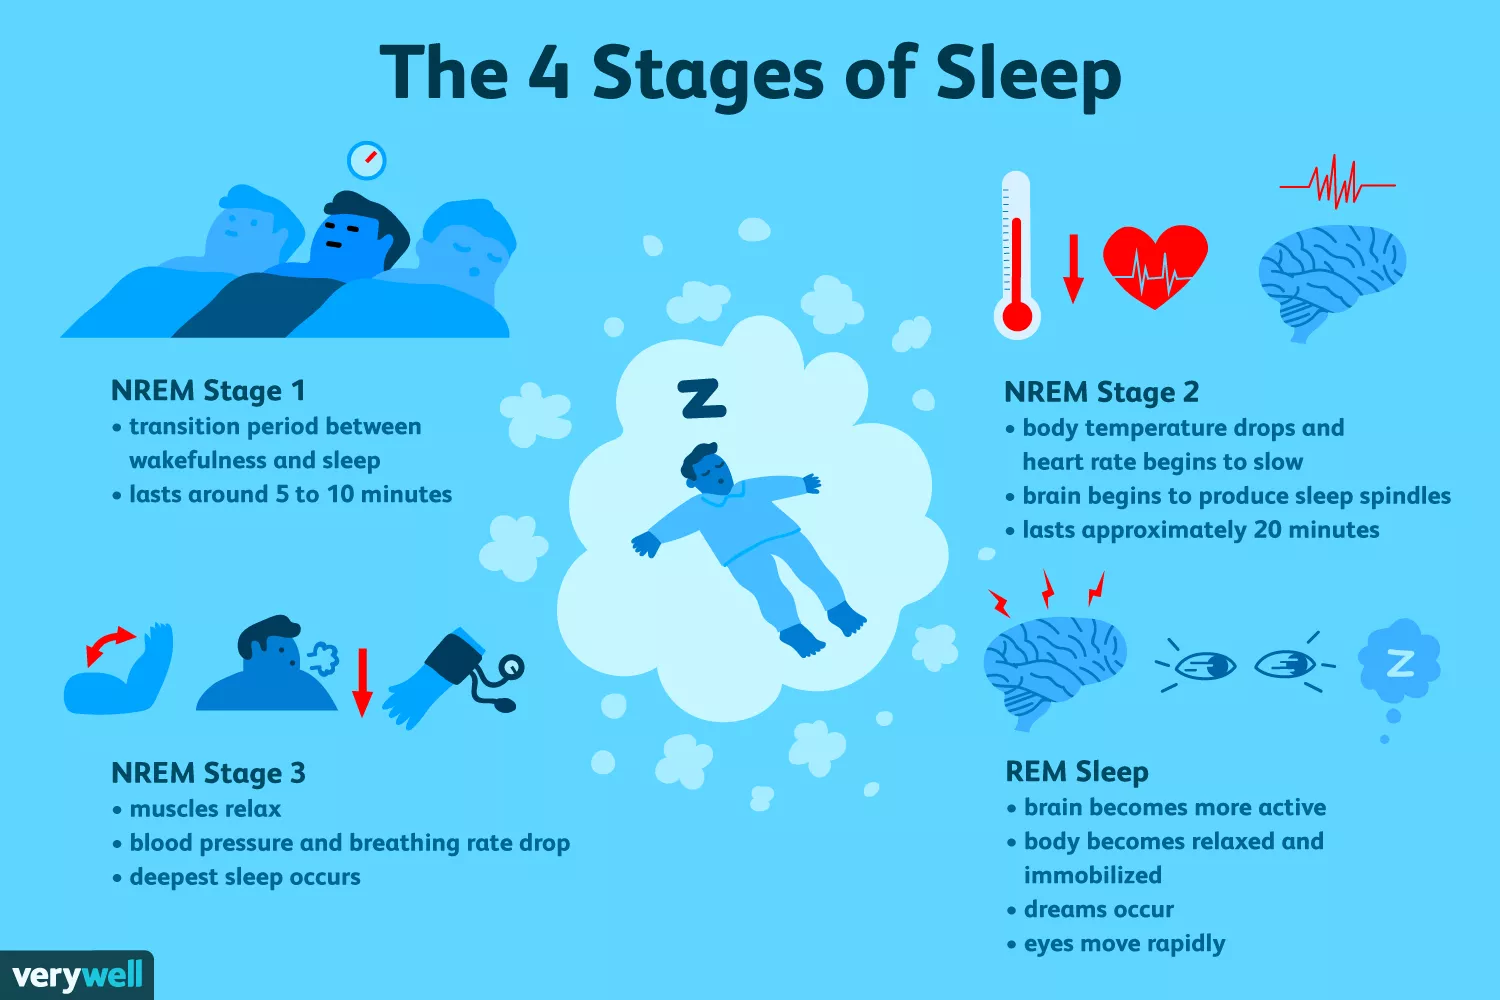 The four stages of sleep